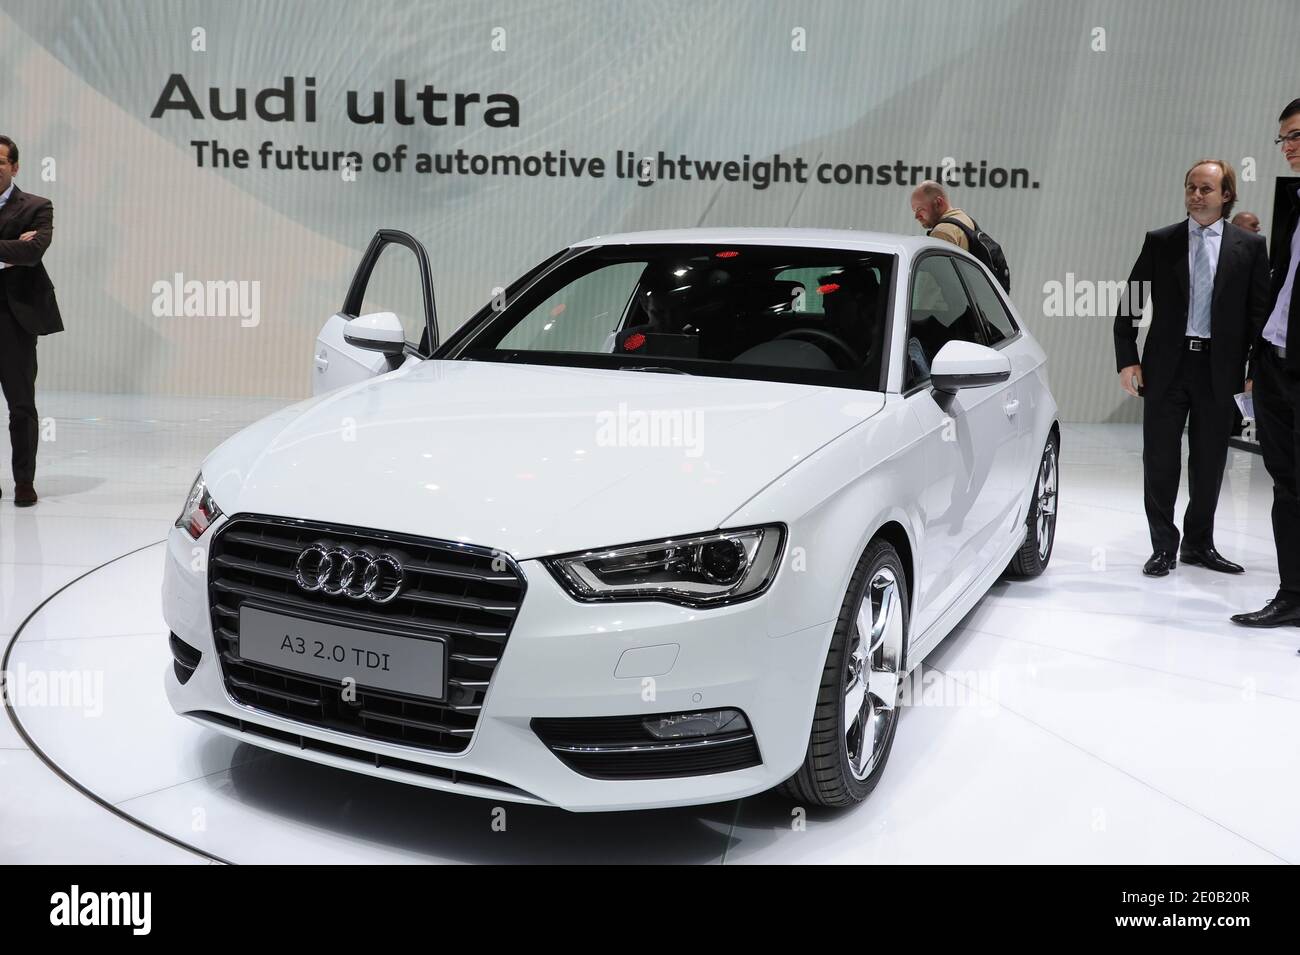 Audi A3 2 0 Tdi High Resolution Stock Photography and Images - Alamy